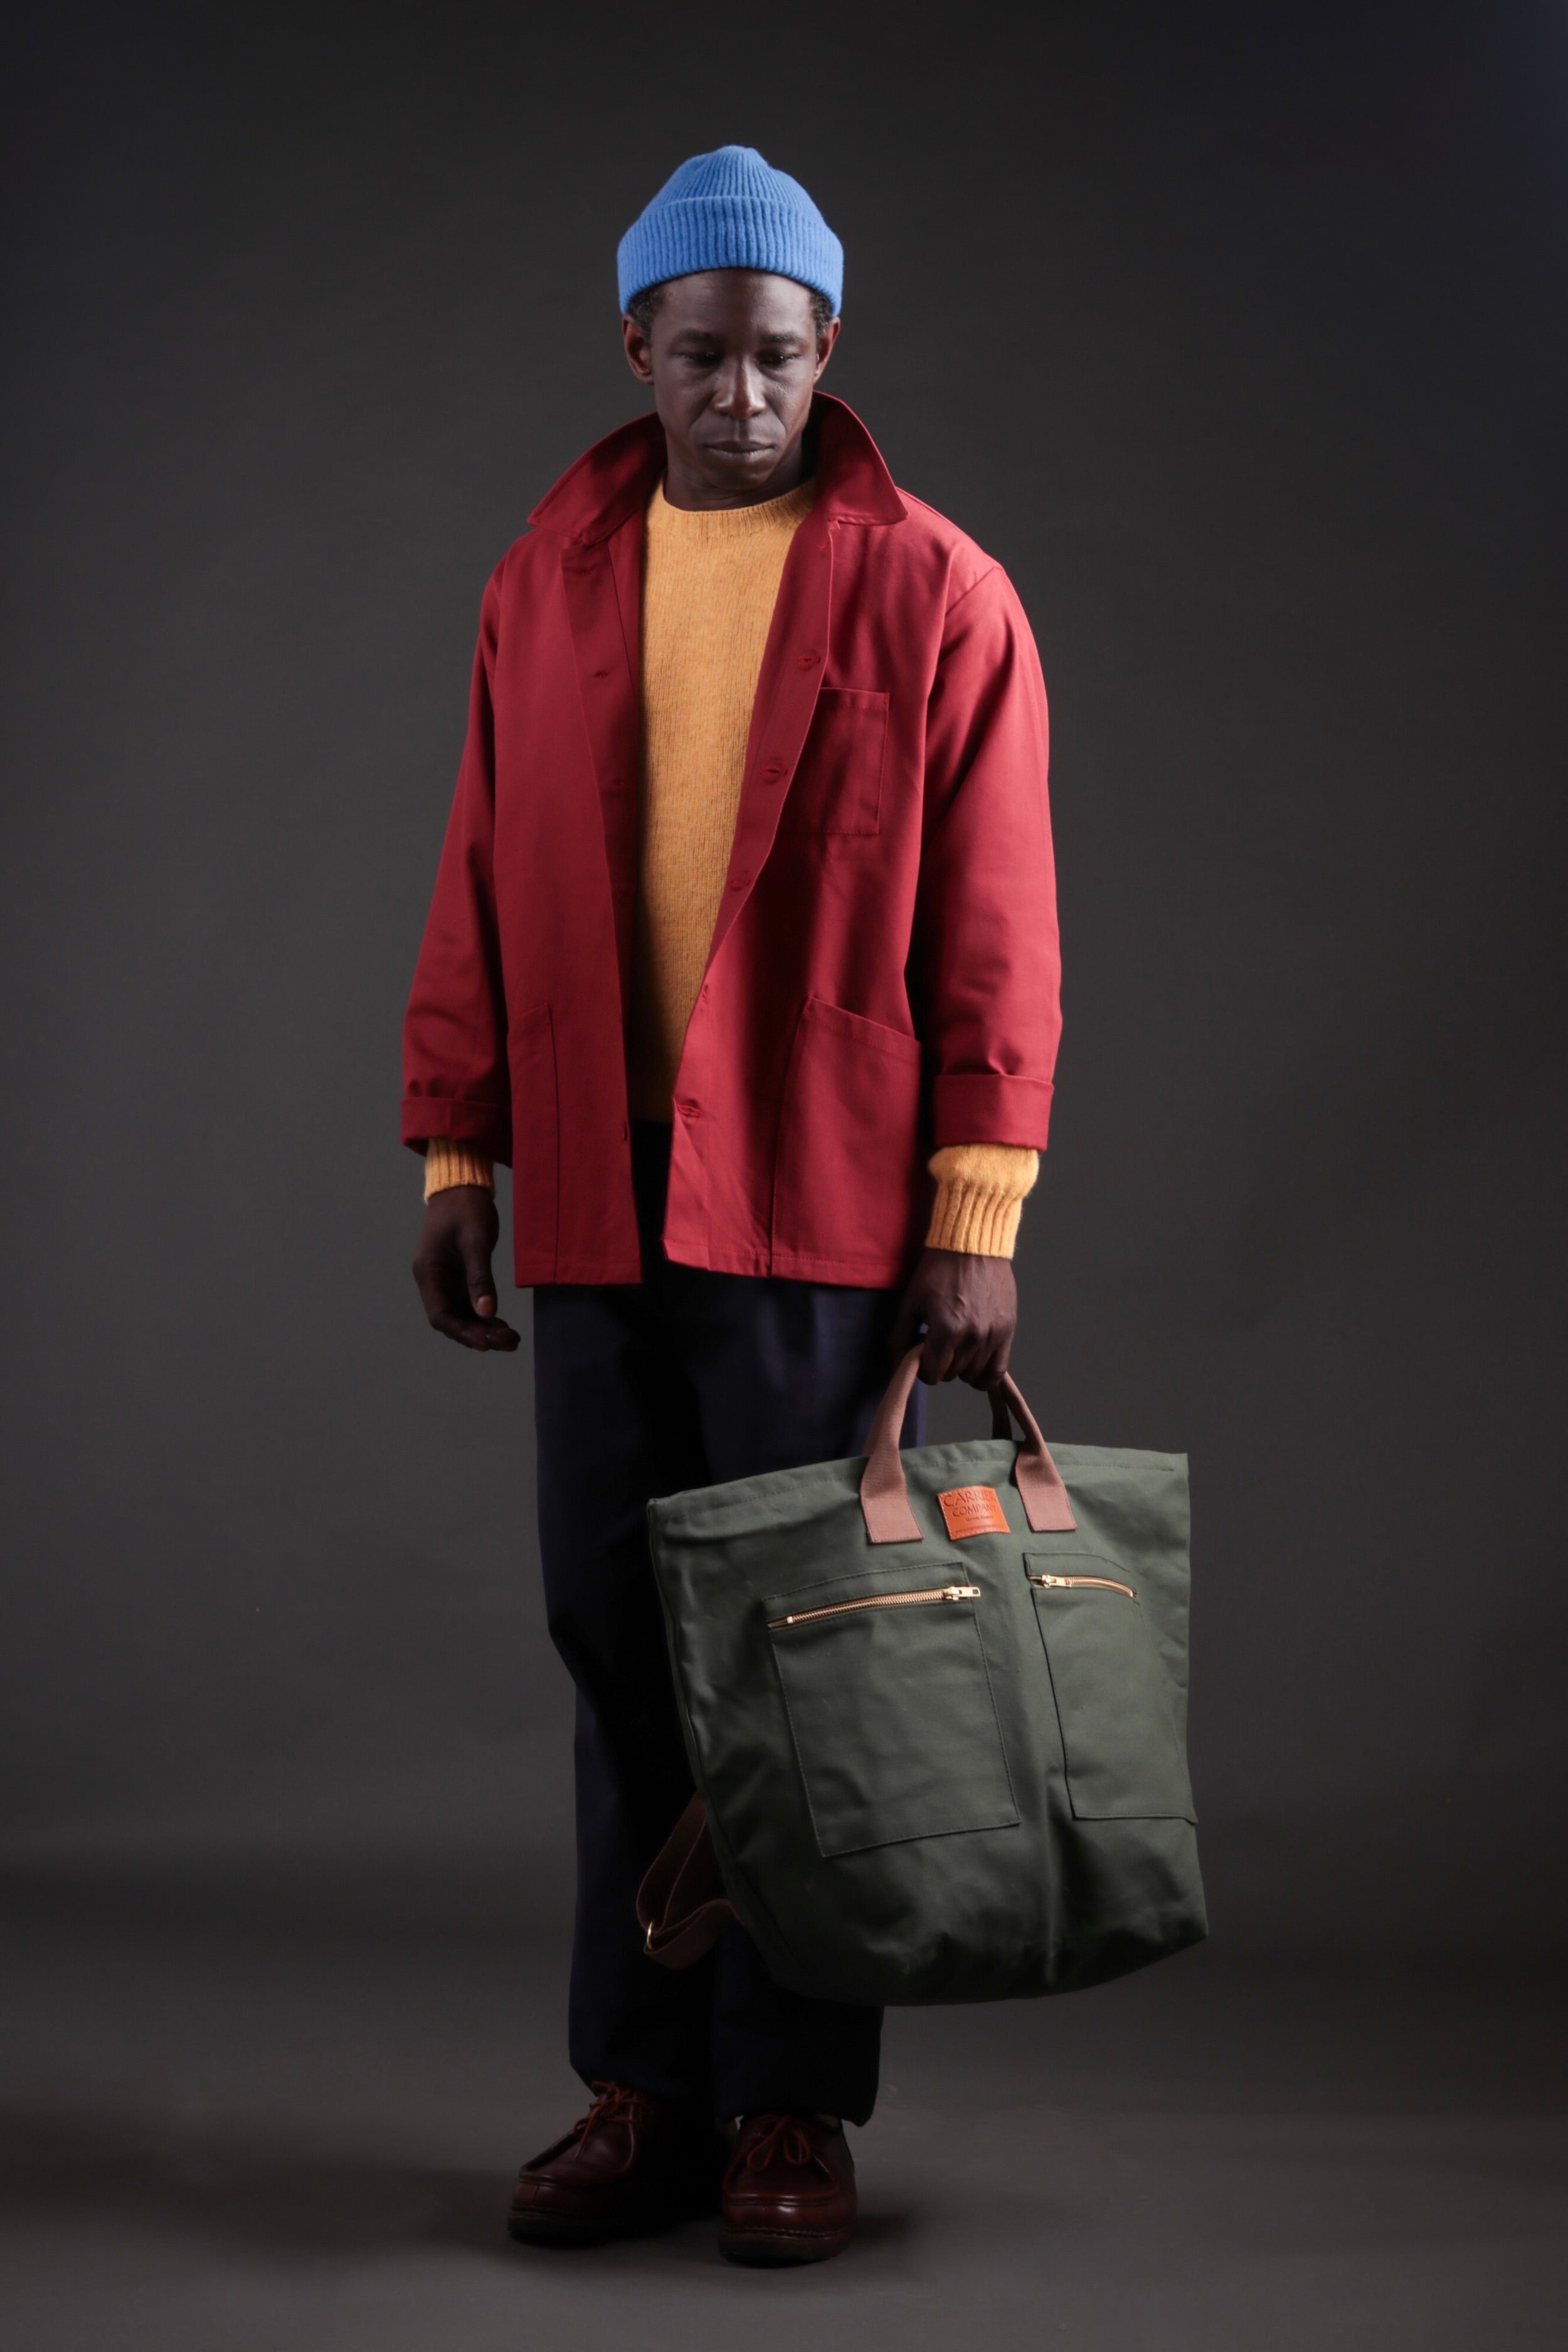 Man wearing Carrier Company Shetland Lambswool Jumper in Chamomile, Breton Norfolk Work Jacket and Navy Classic Trousers. Man is holding Carrier Company Olive Backpack.